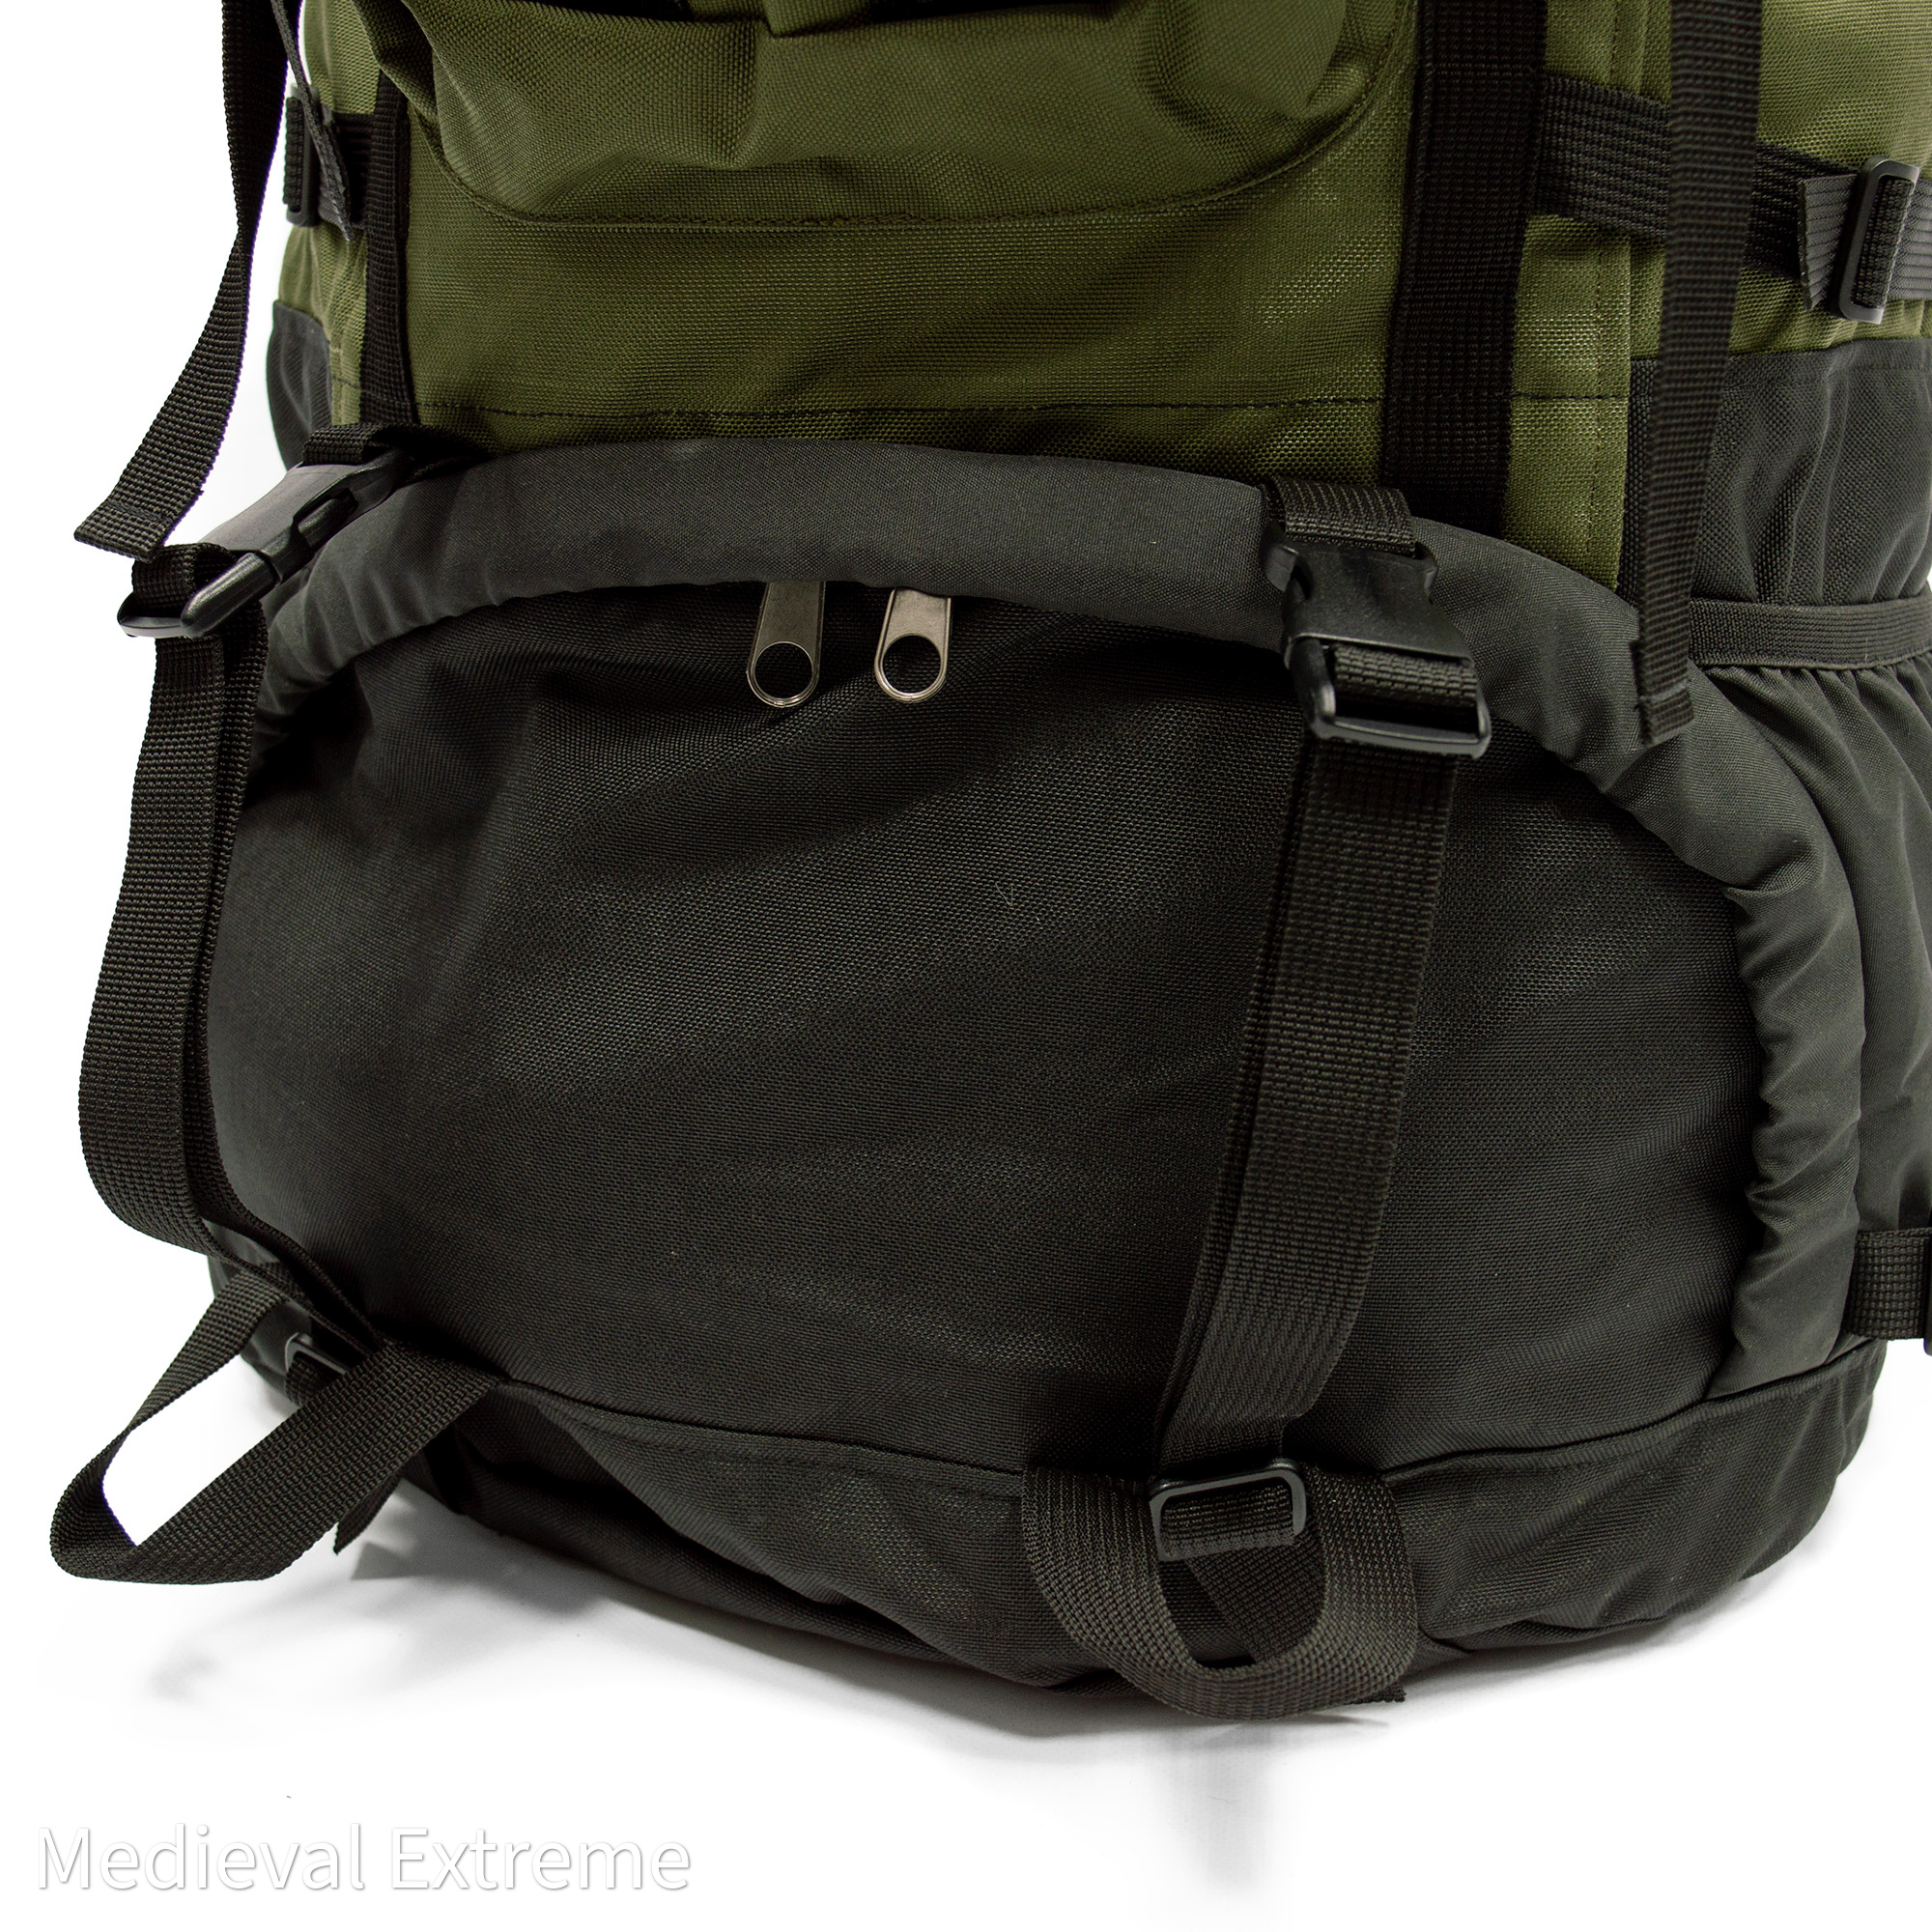 Backpack for armor 125 liters • Medieval Extreme